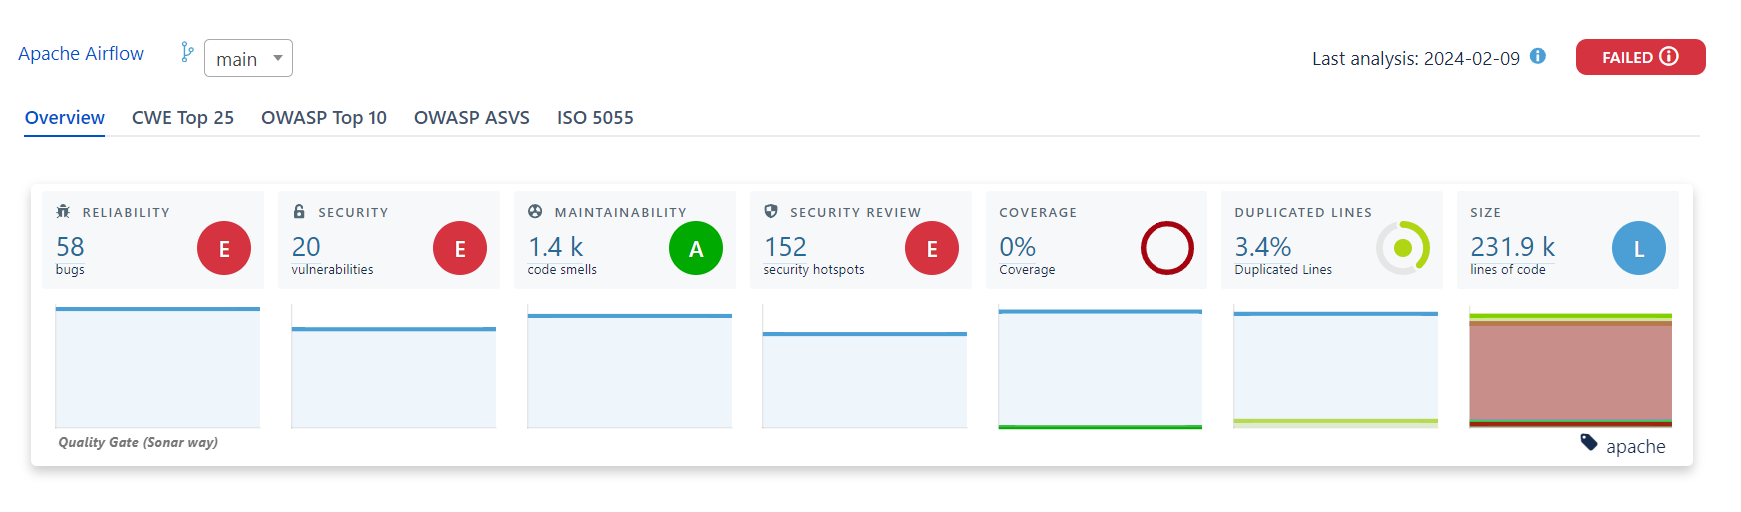 SonarQube Connector for Jira Cloud Visualization 1 month